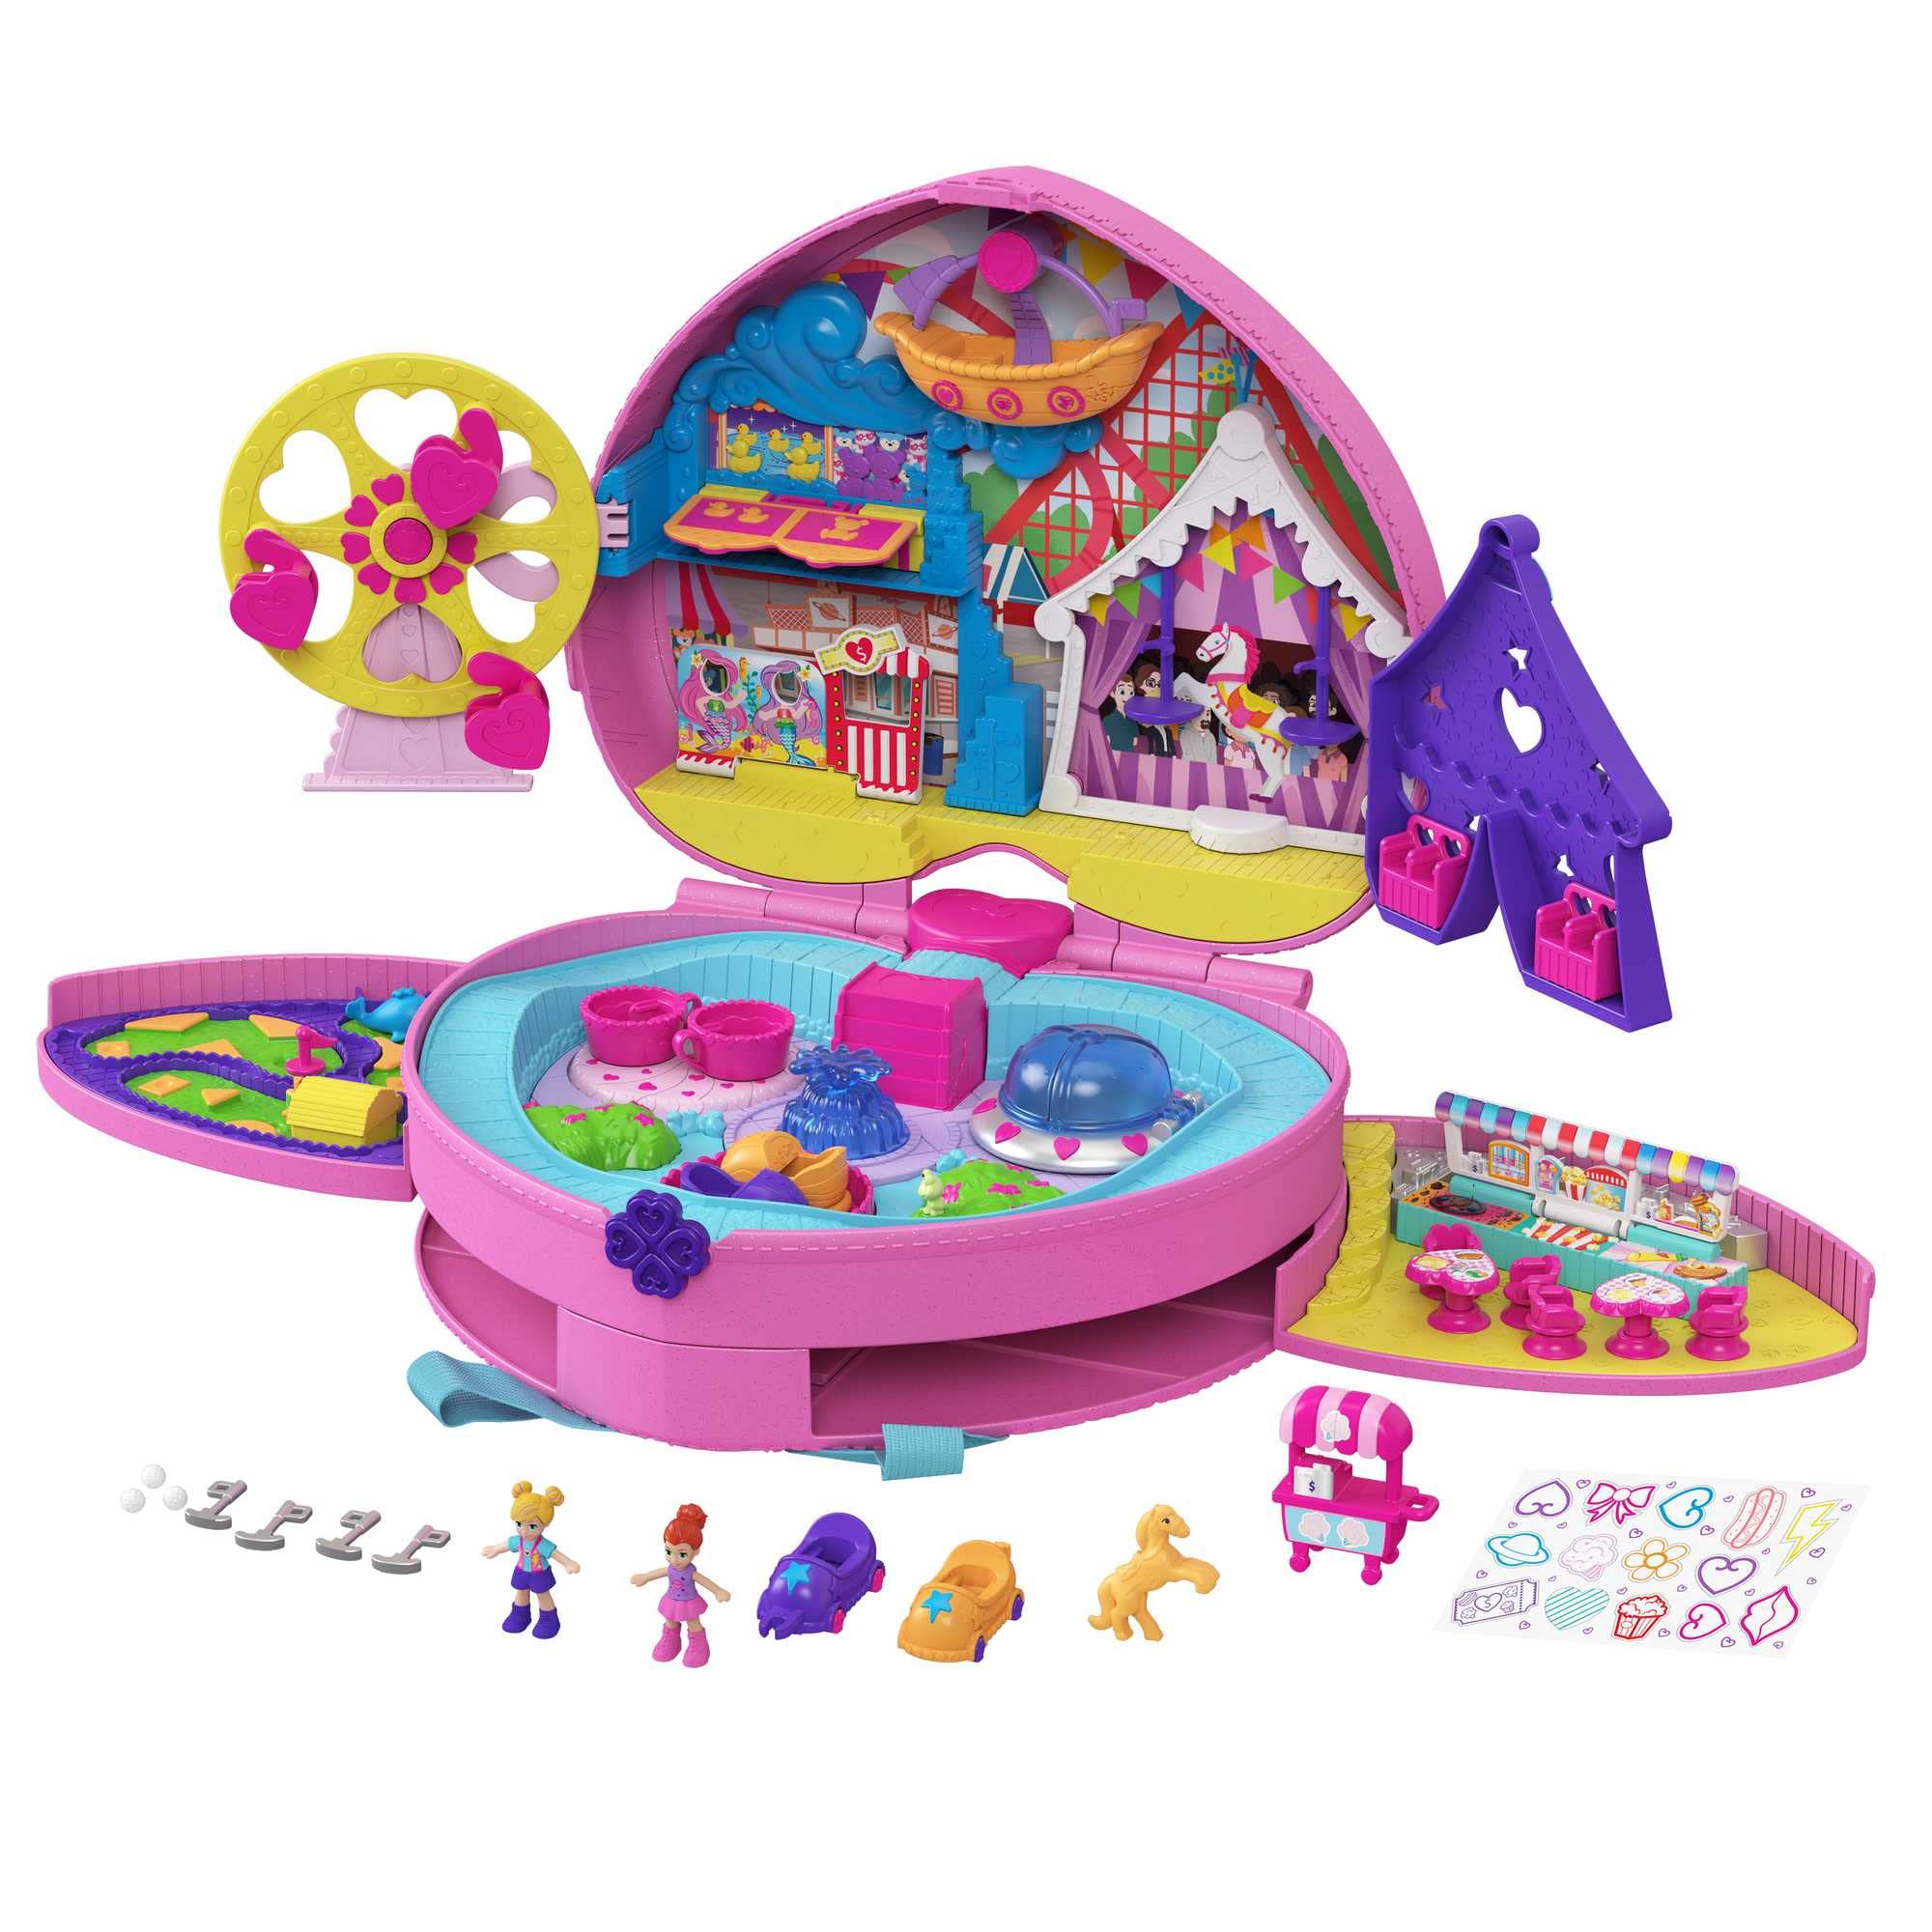 Polly Pocket Travel Toys, Backpack compact Playset with 2 Micro Dolls and Accessories, Theme Park with Activities